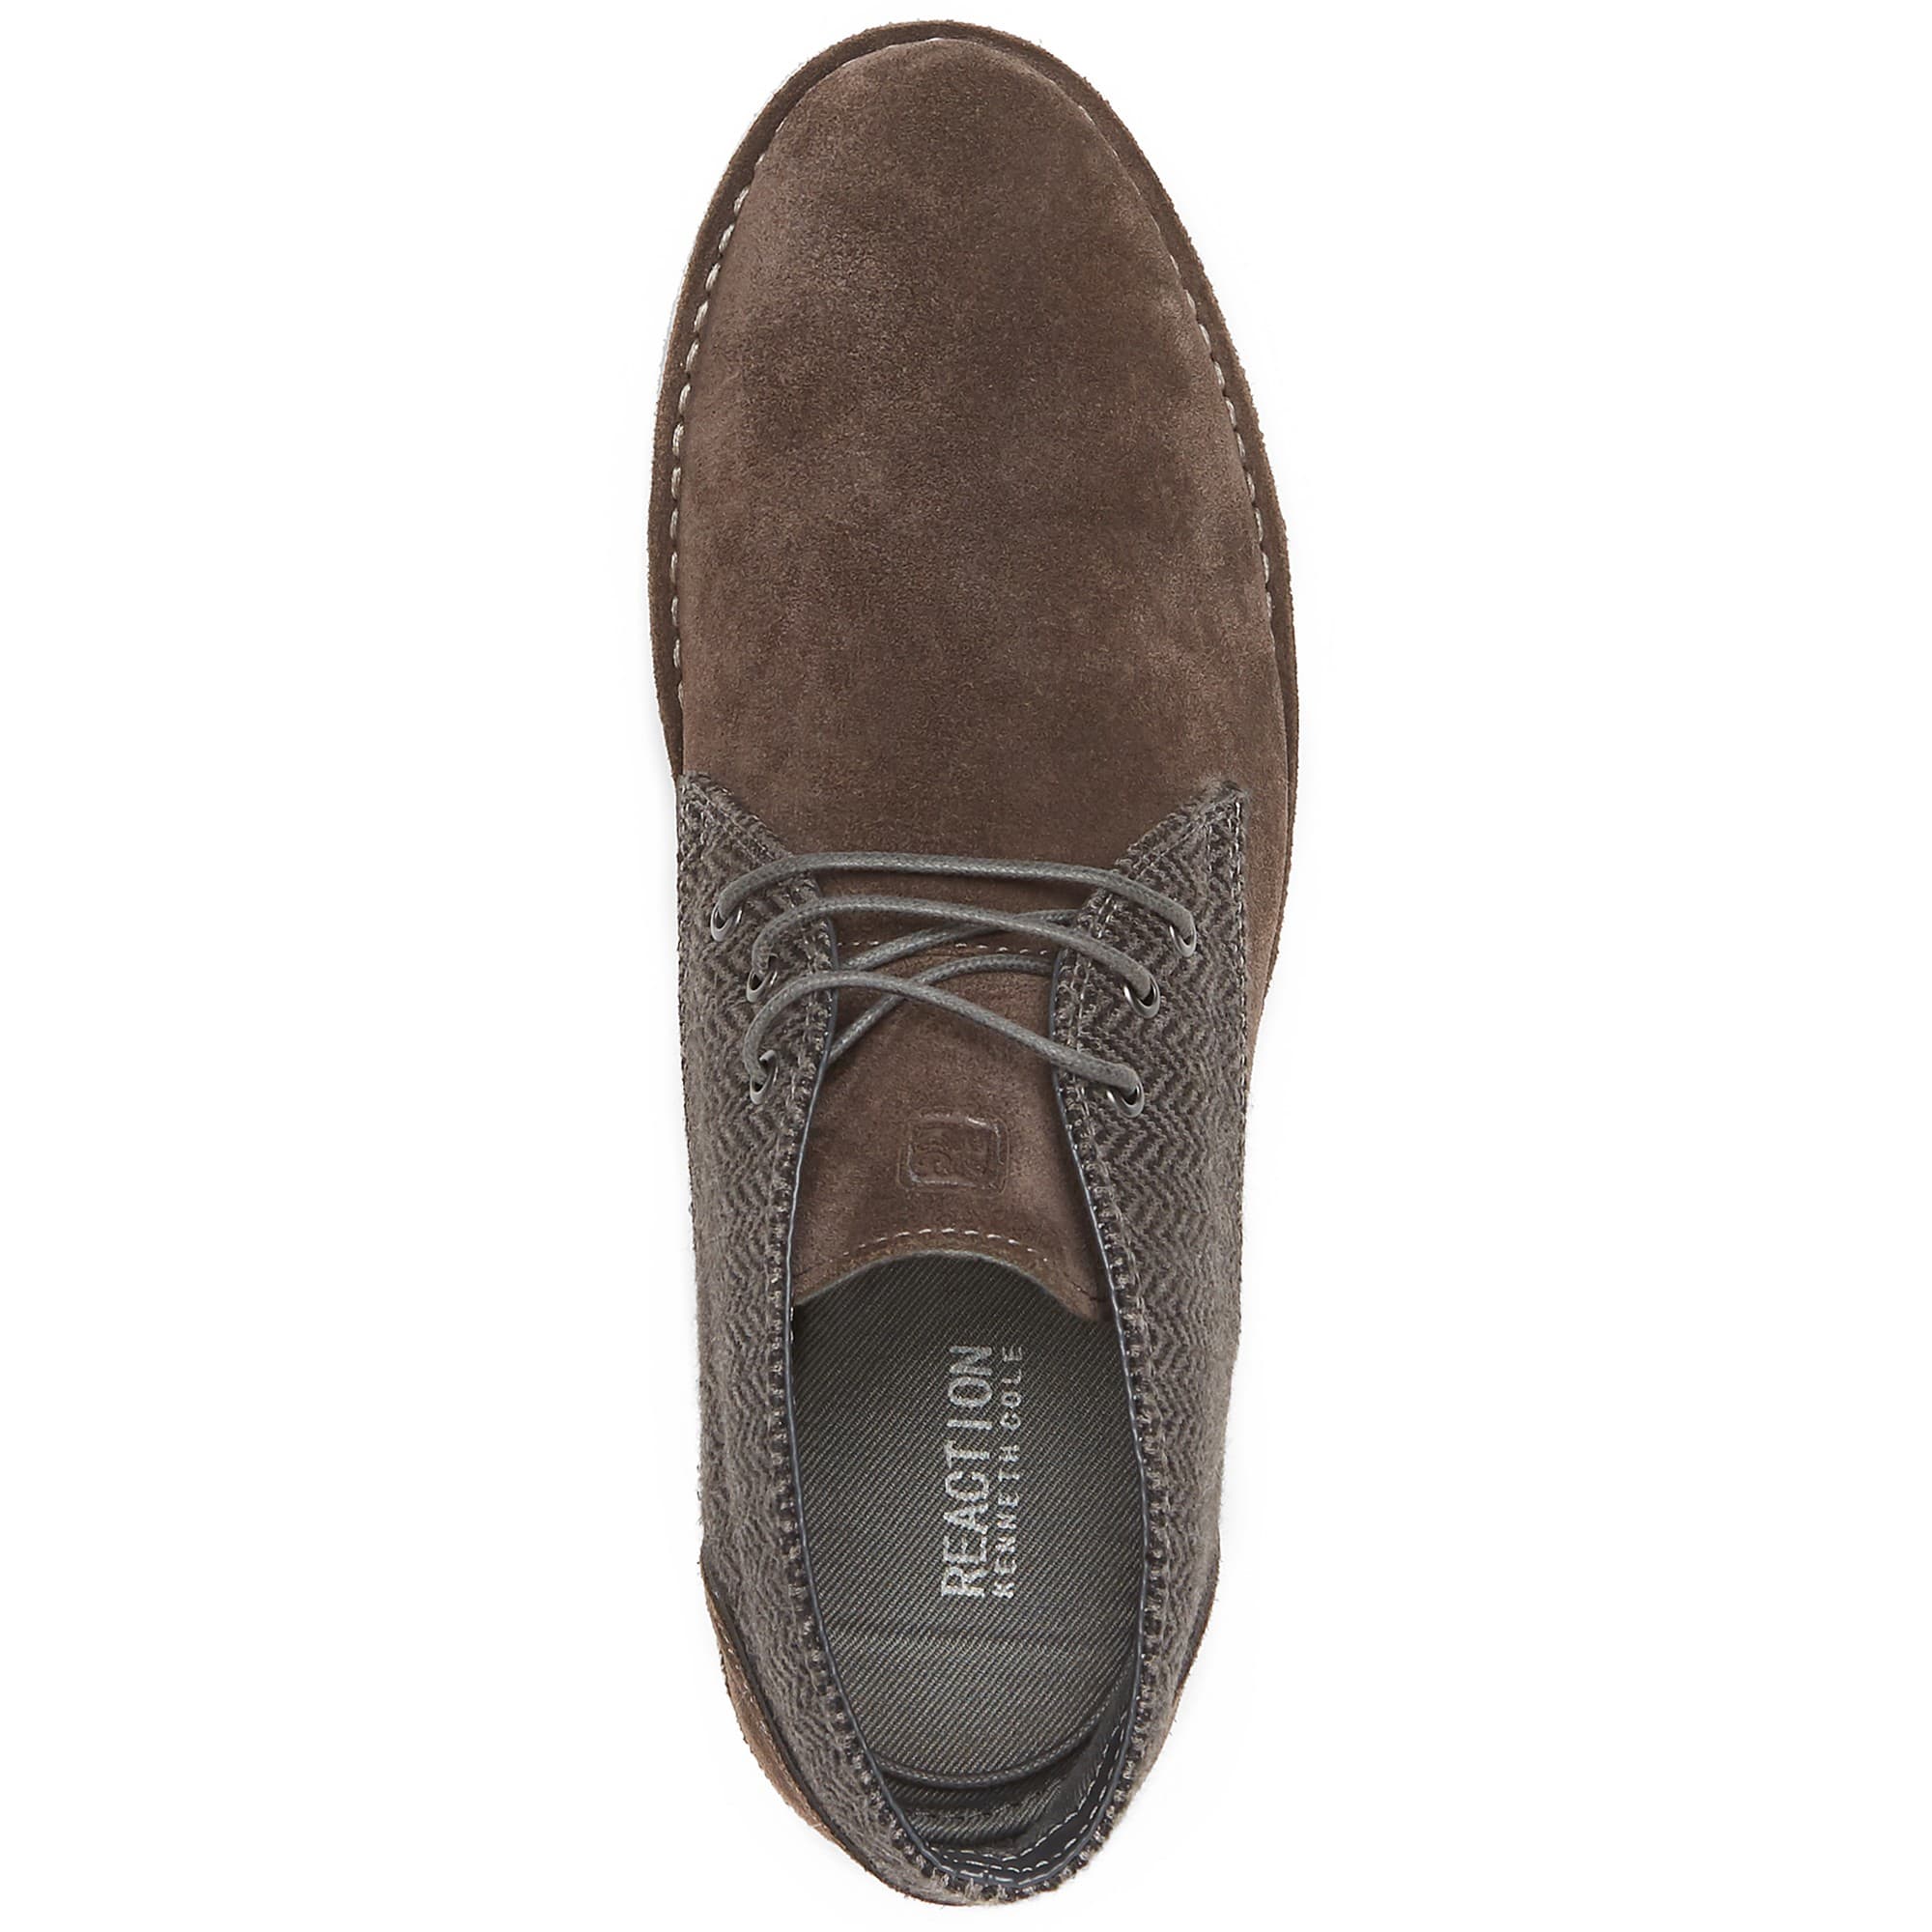 woocommerce-673321-2209615.cloudwaysapps.com-kenneth-cole-reaction-mens-grey-suede-passage-chukka-boots